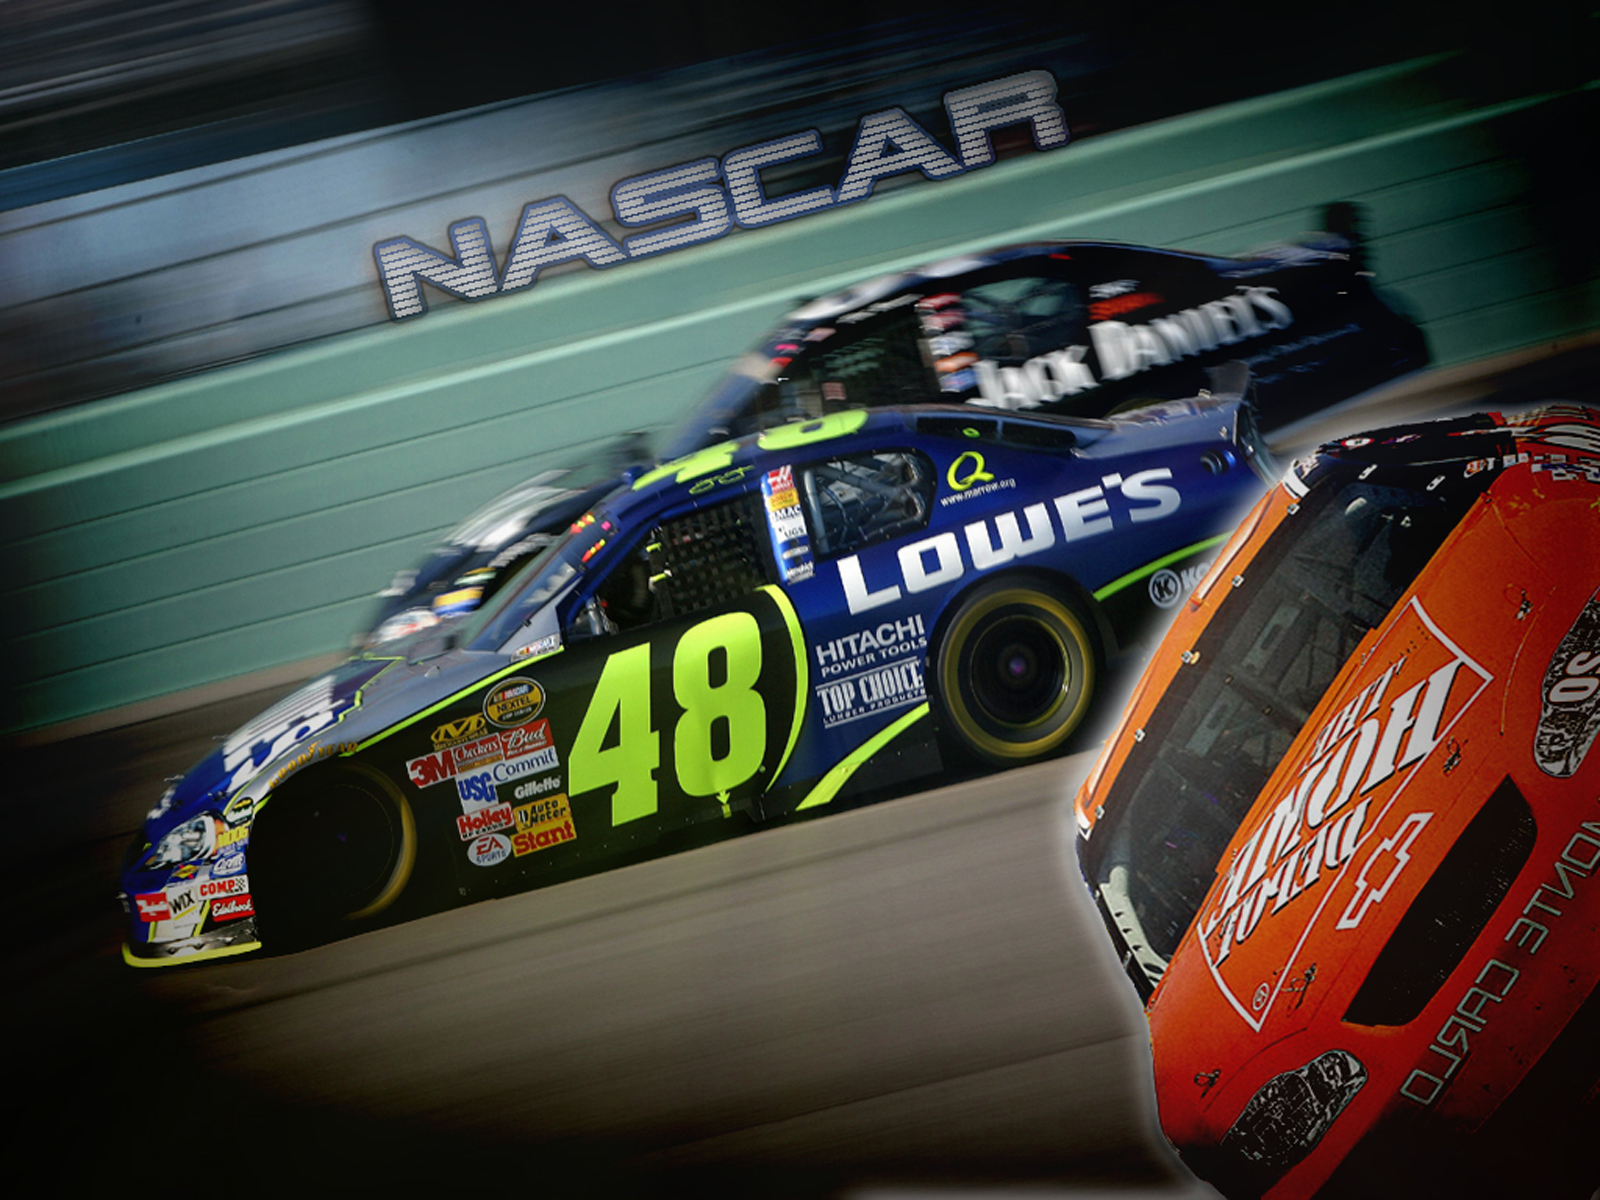 Nascar HD Wallpaper Auto Sports In For